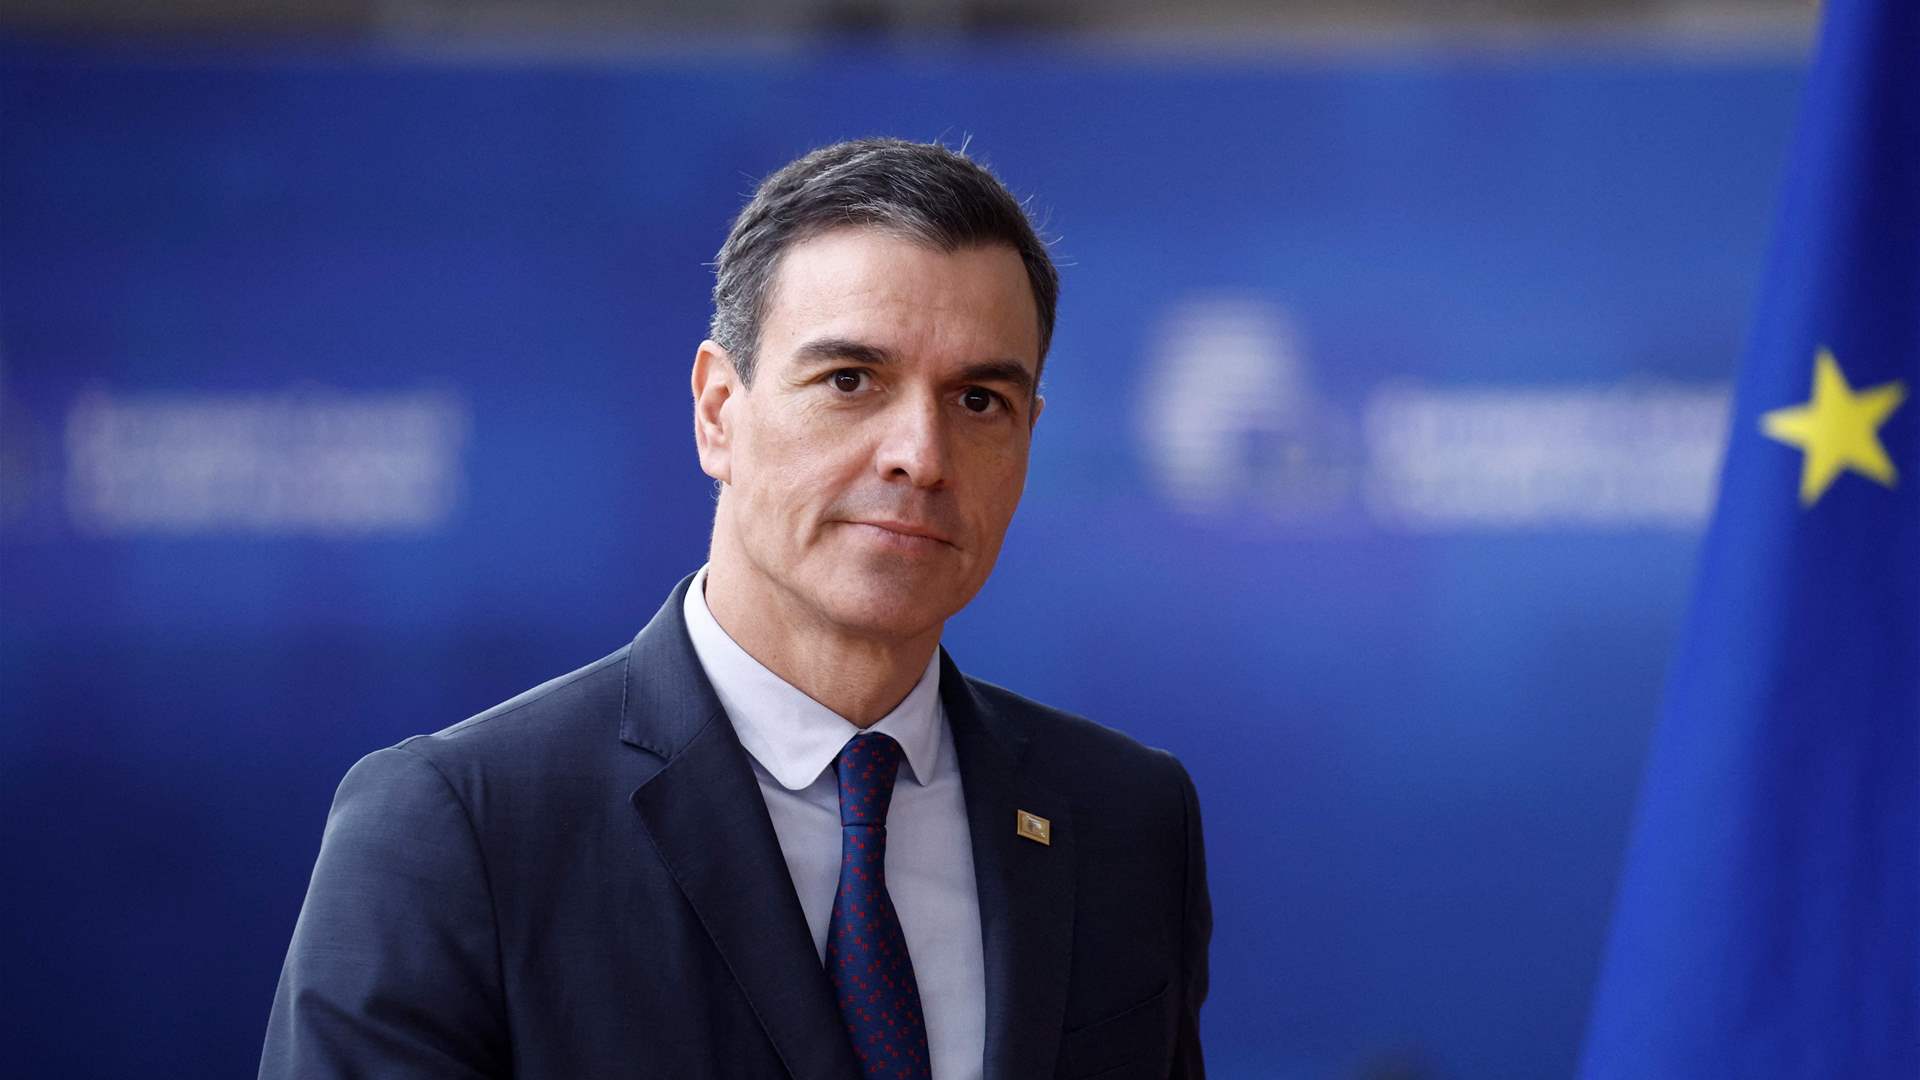 Spanish PM states Israel&#39;s explanation on aid workers attack is &#39;insufficient and unacceptable&#39;